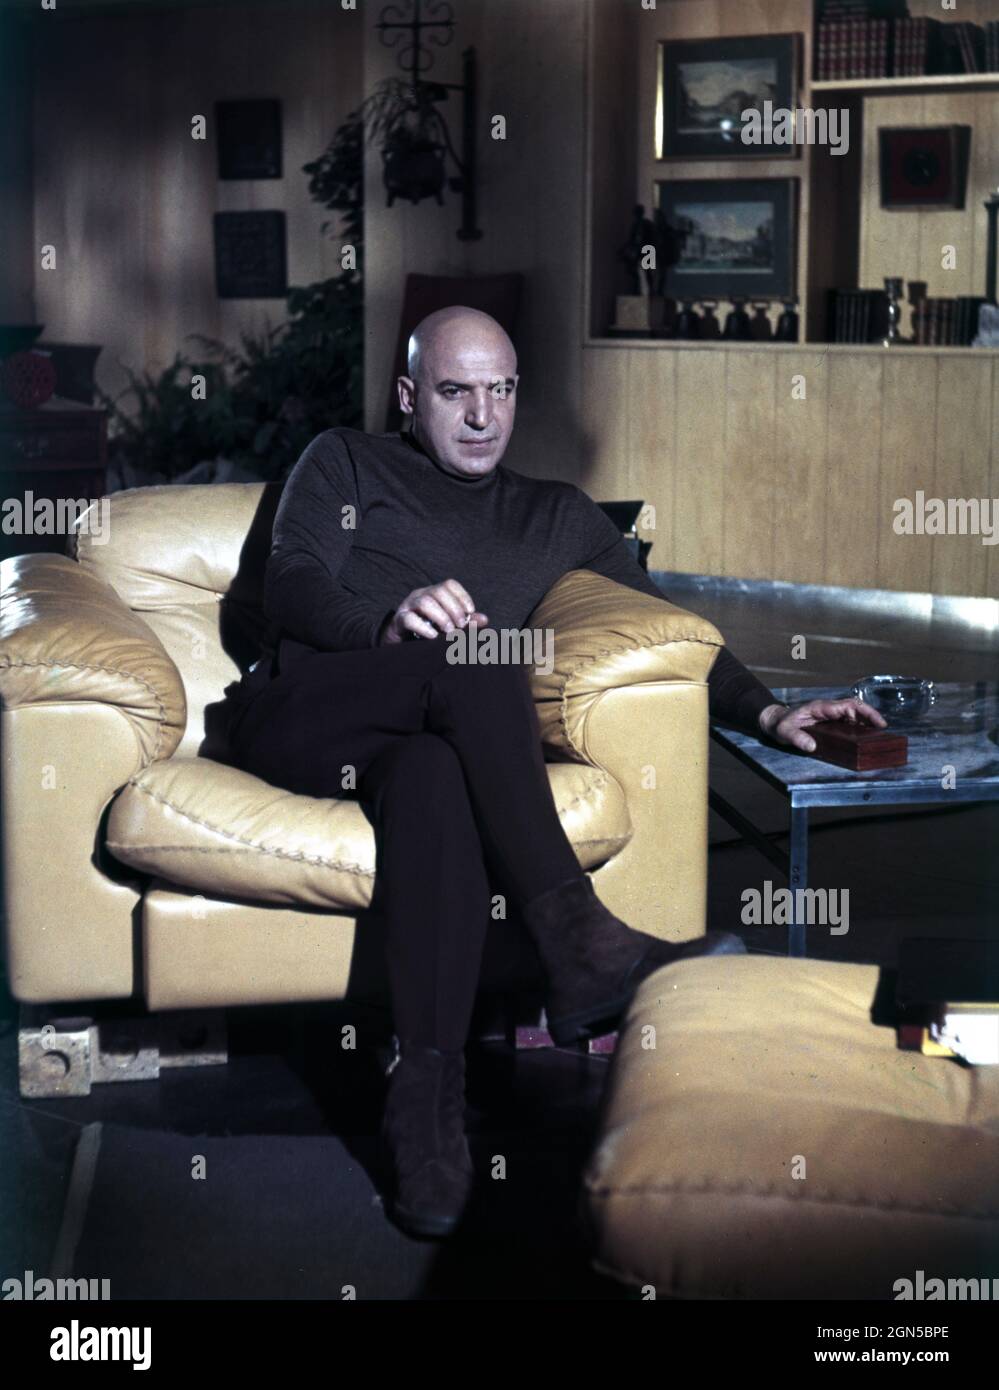 Blofeld Bond High Resolution Stock Photography and Images - Alamy